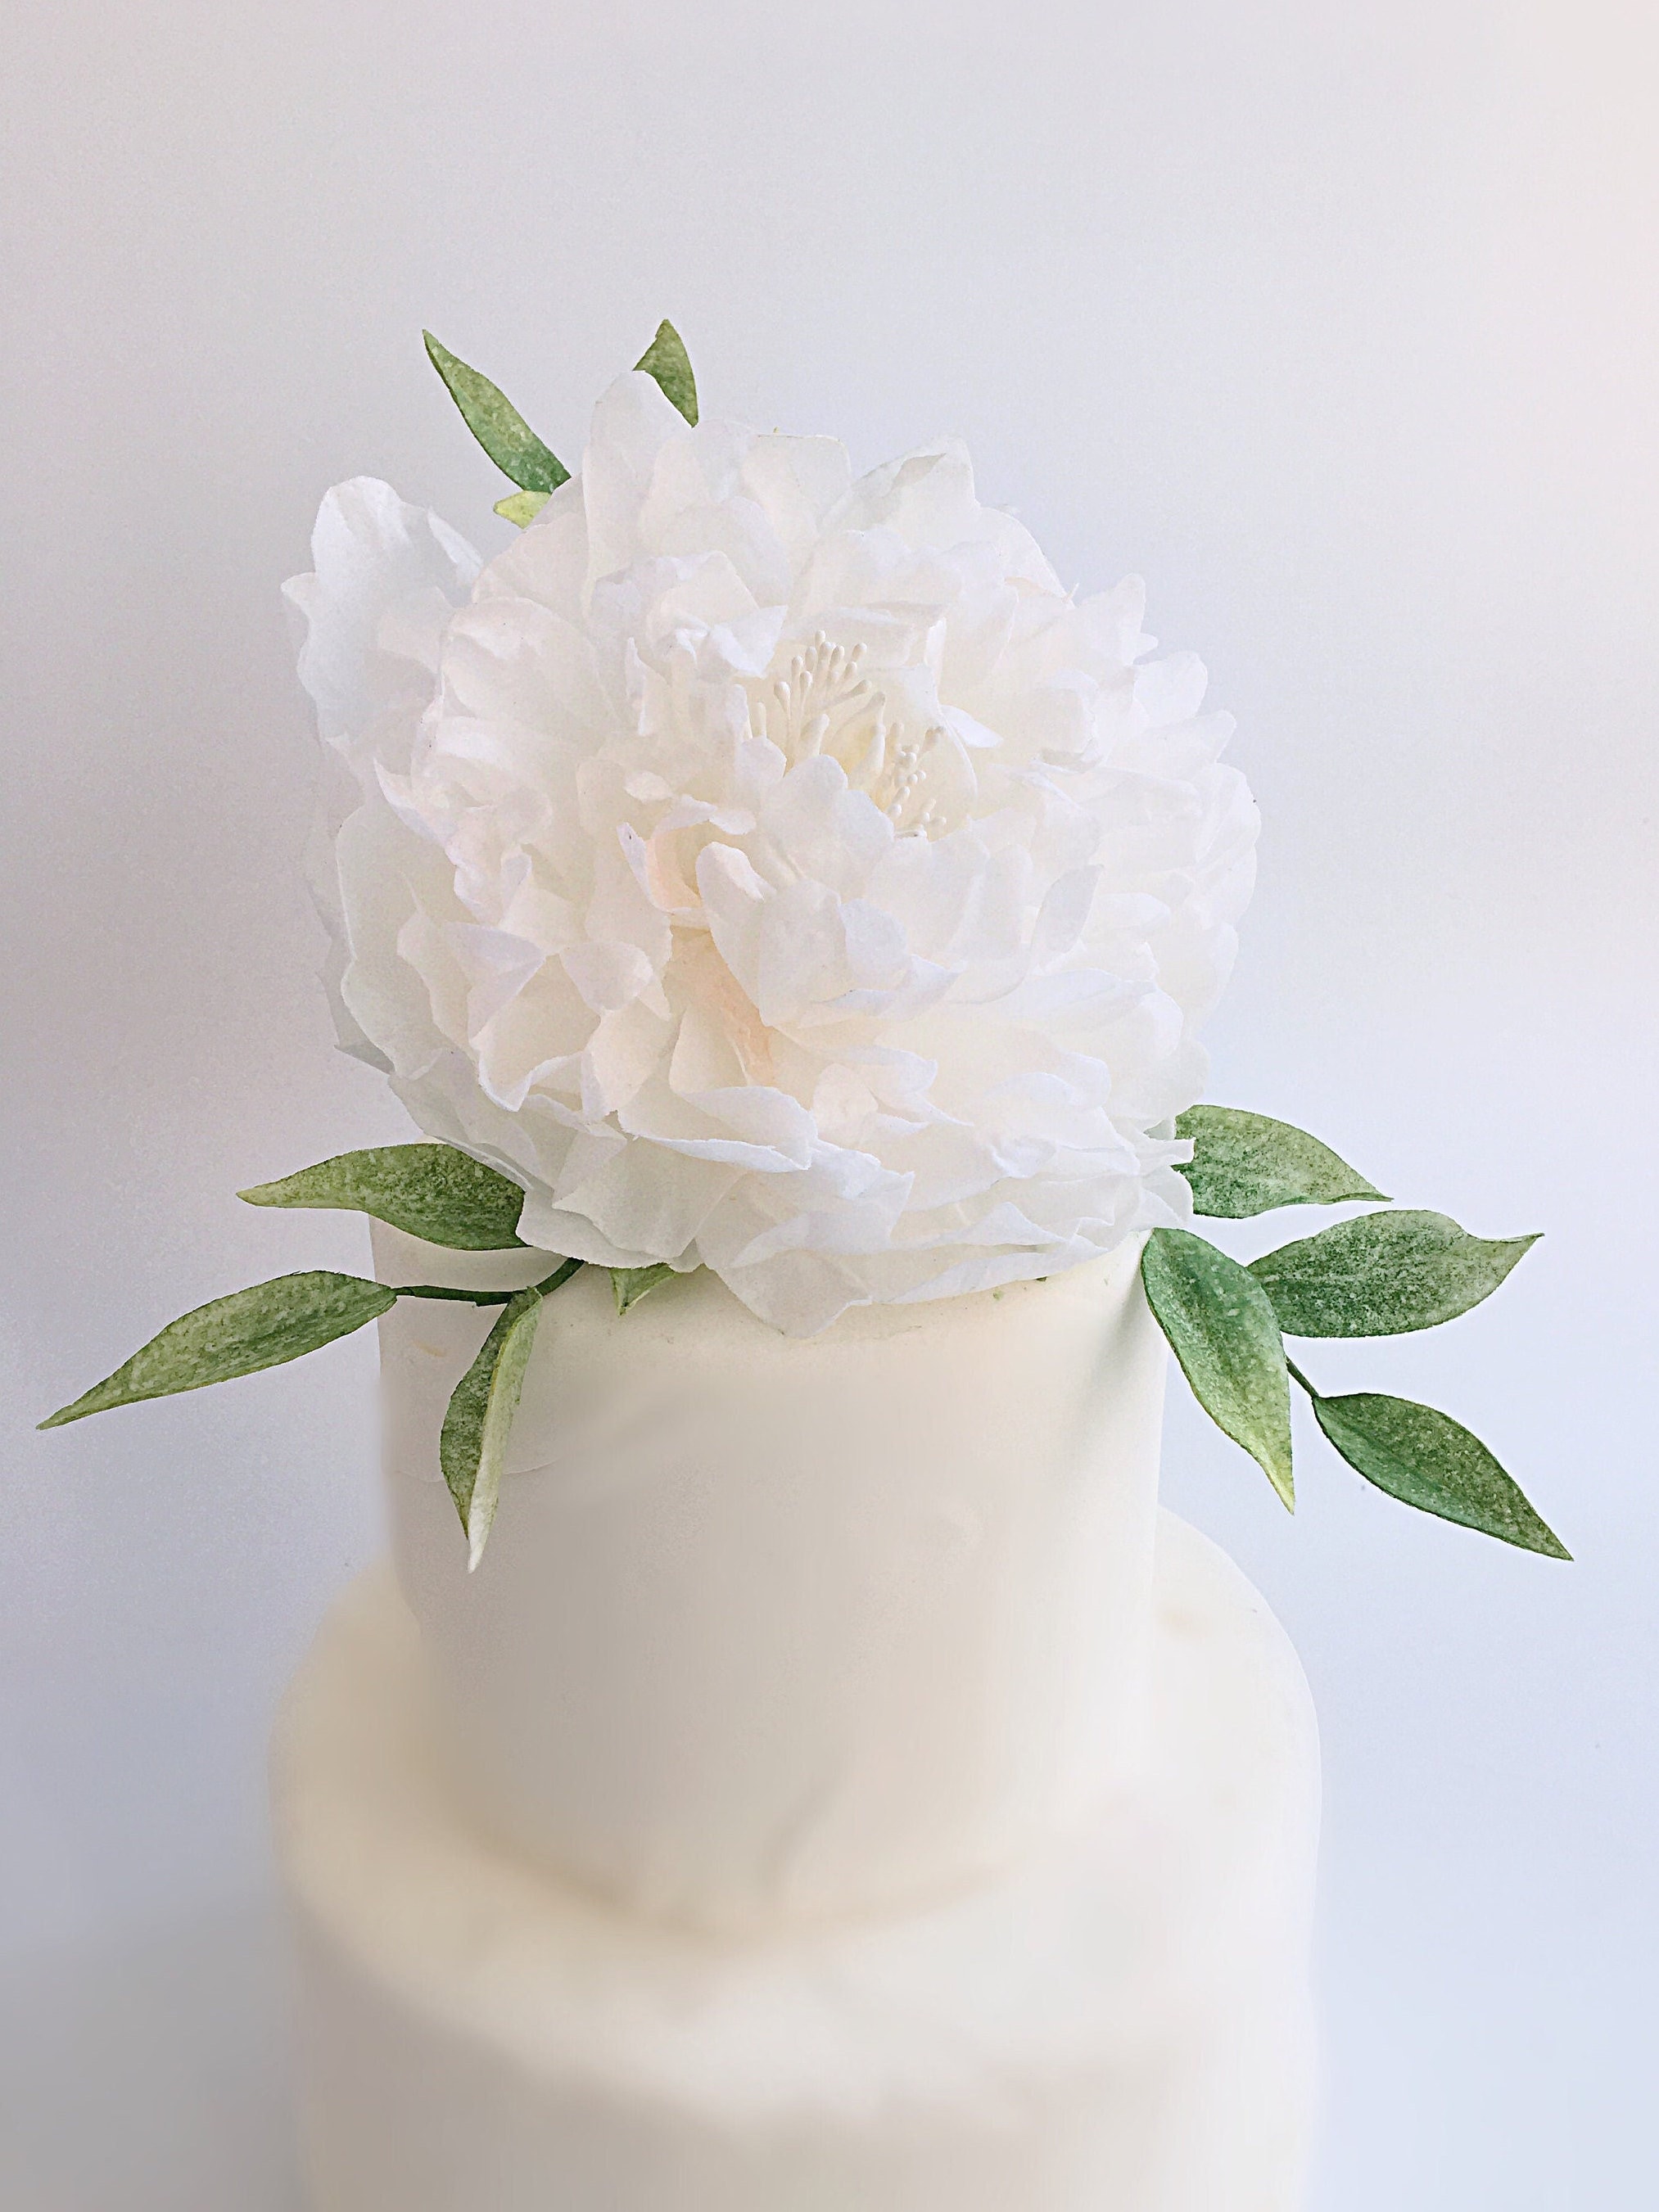 Peony Wafer Paper Cake Floral Border Wrap for Cake Decorating. Edible Paper  to Wrap a Cake Tier With Magenta Peonies, Buttercream or Fondant 